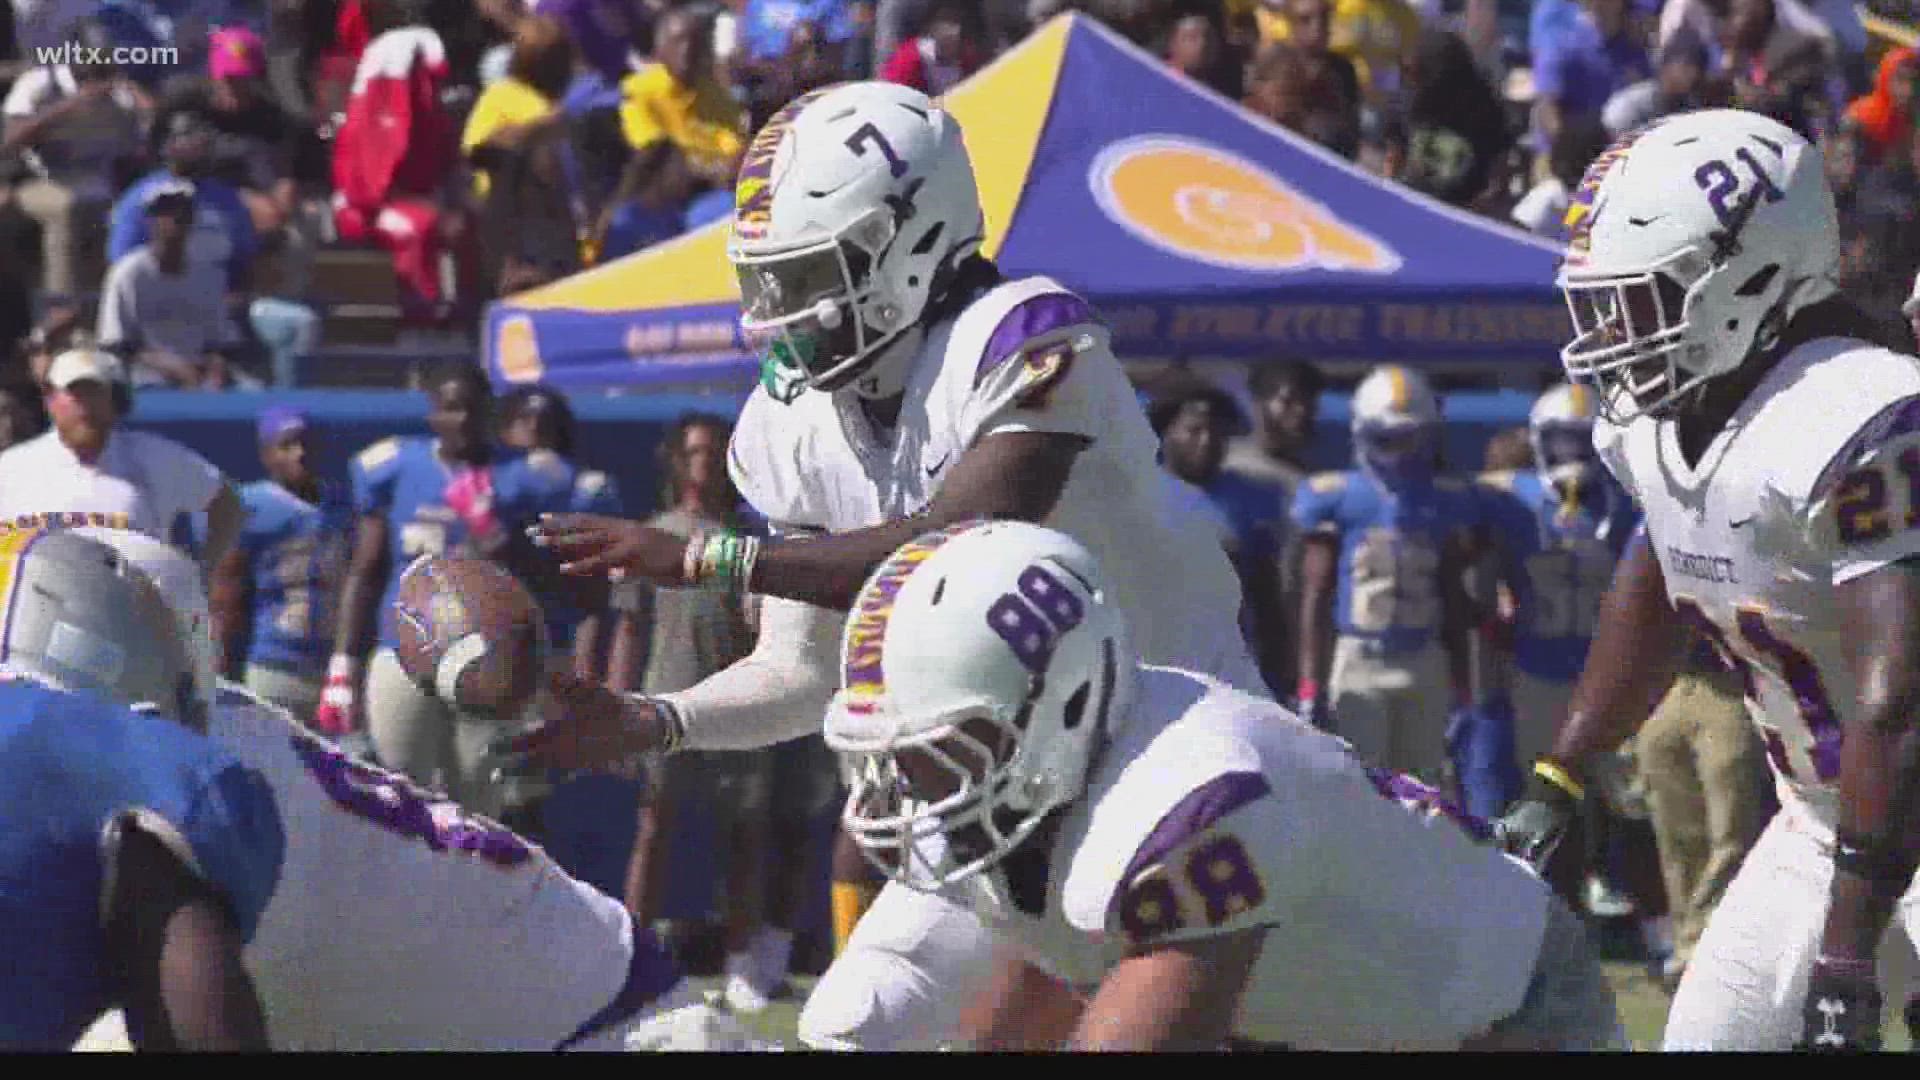 Benedict College seizes control of the SIAC East Division with a 24-20 win at Albany State in a battle of top 25 teams.